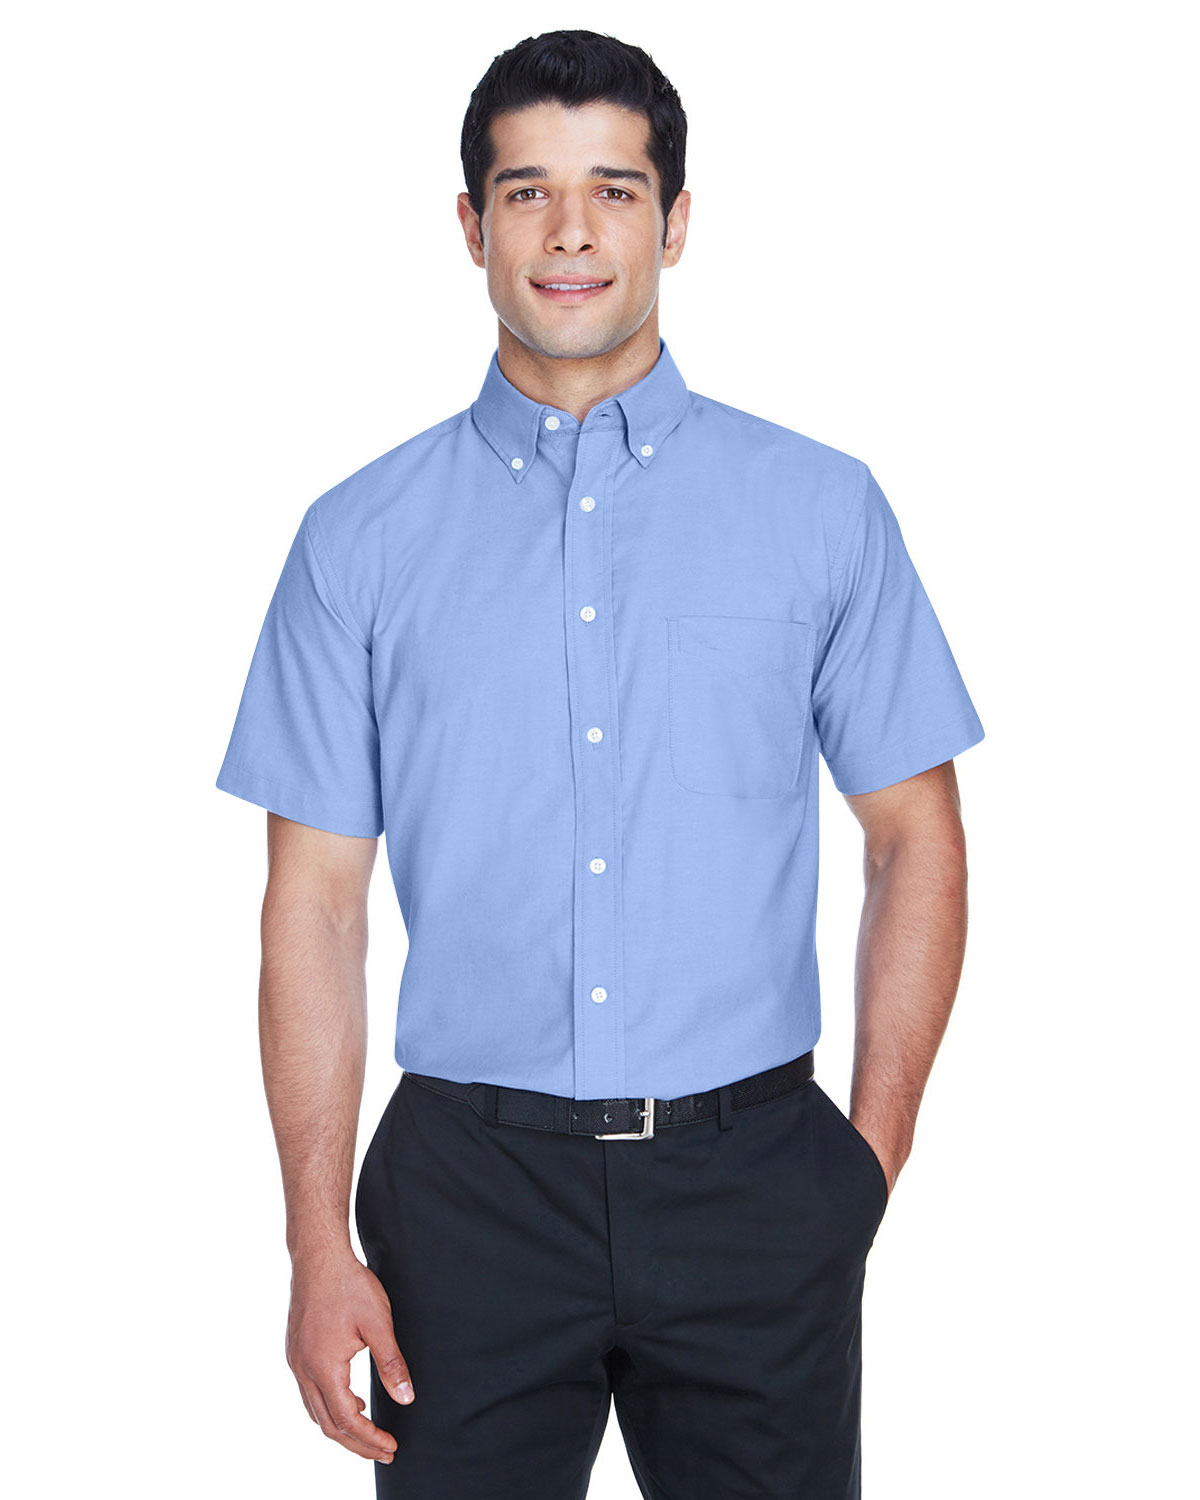 Harriton M600S Men Short-Sleeve Oxford With Stain-Release at Apparelstation